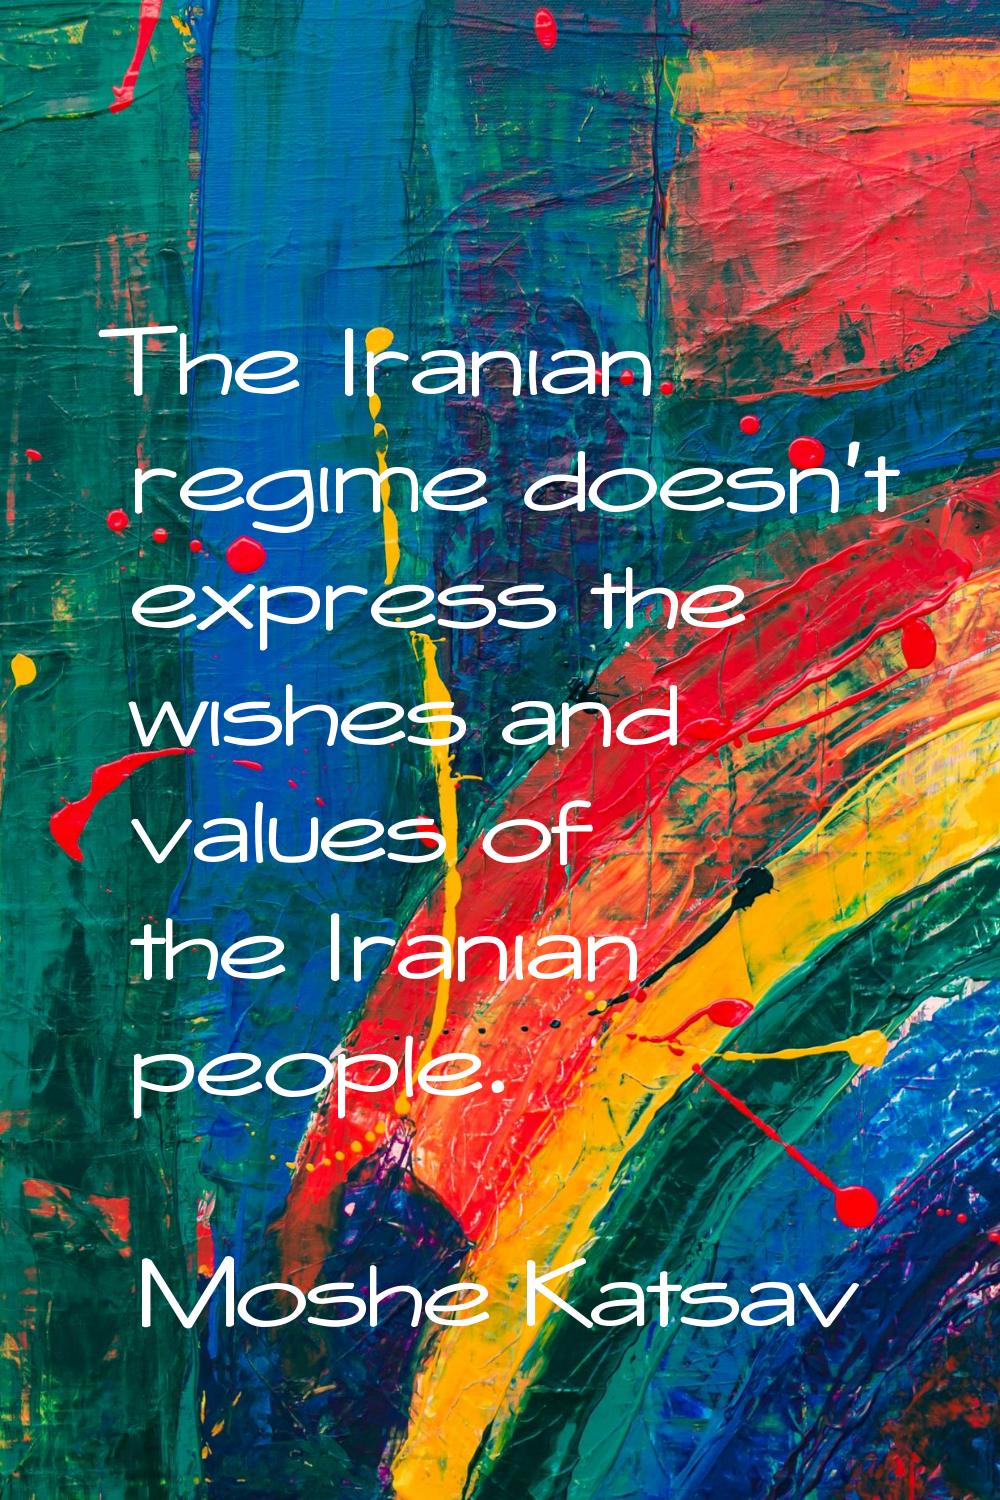 The Iranian regime doesn't express the wishes and values of the Iranian people.